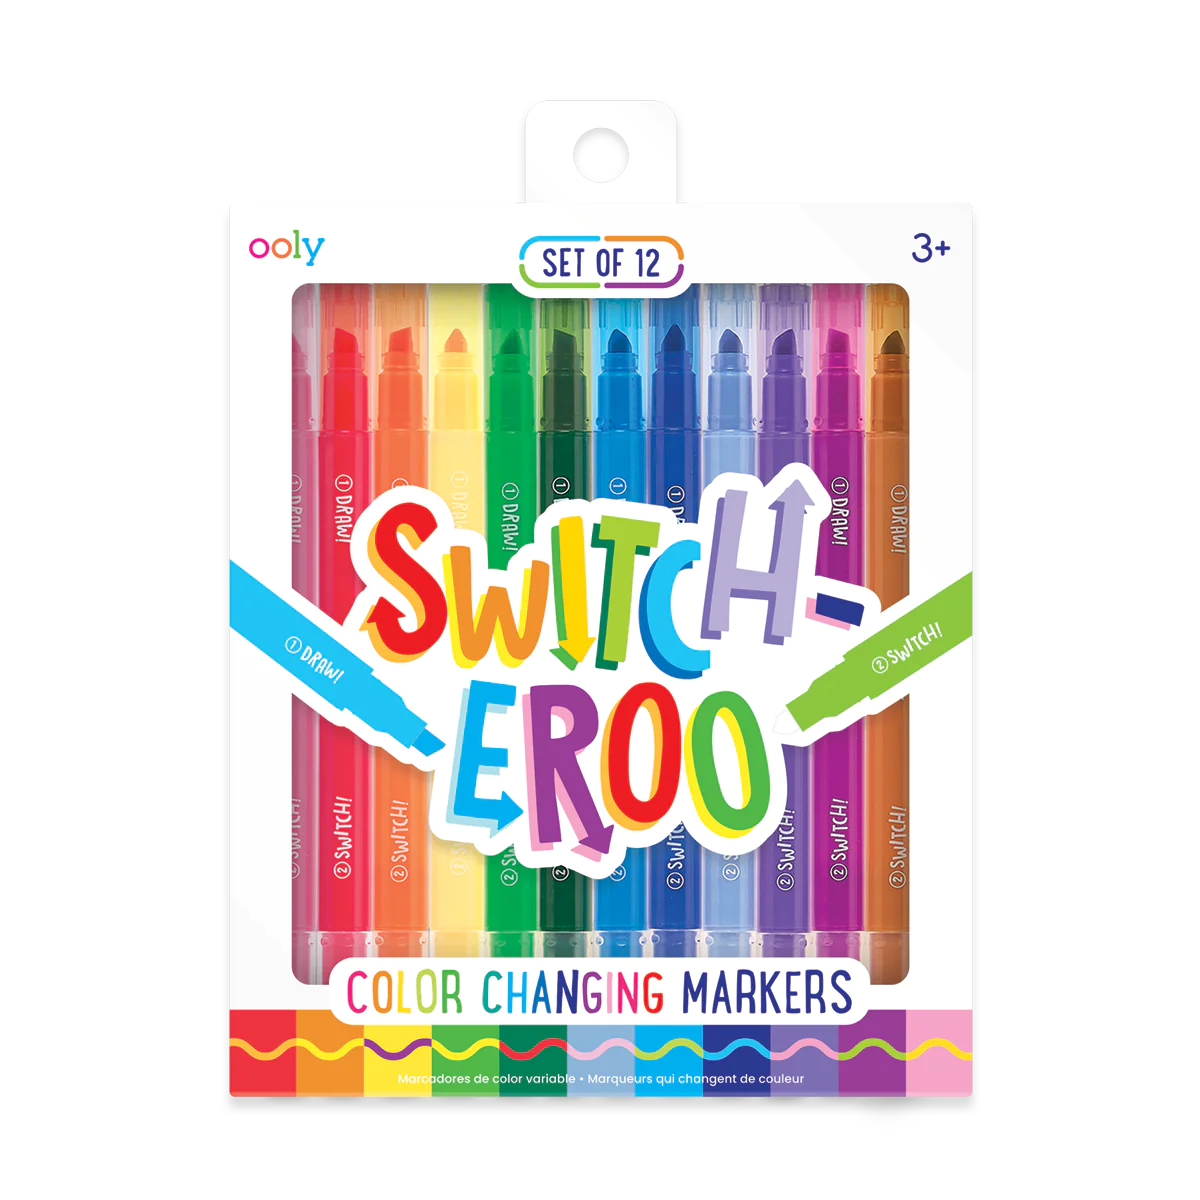 Switch-eroo Coloring Changing Markers